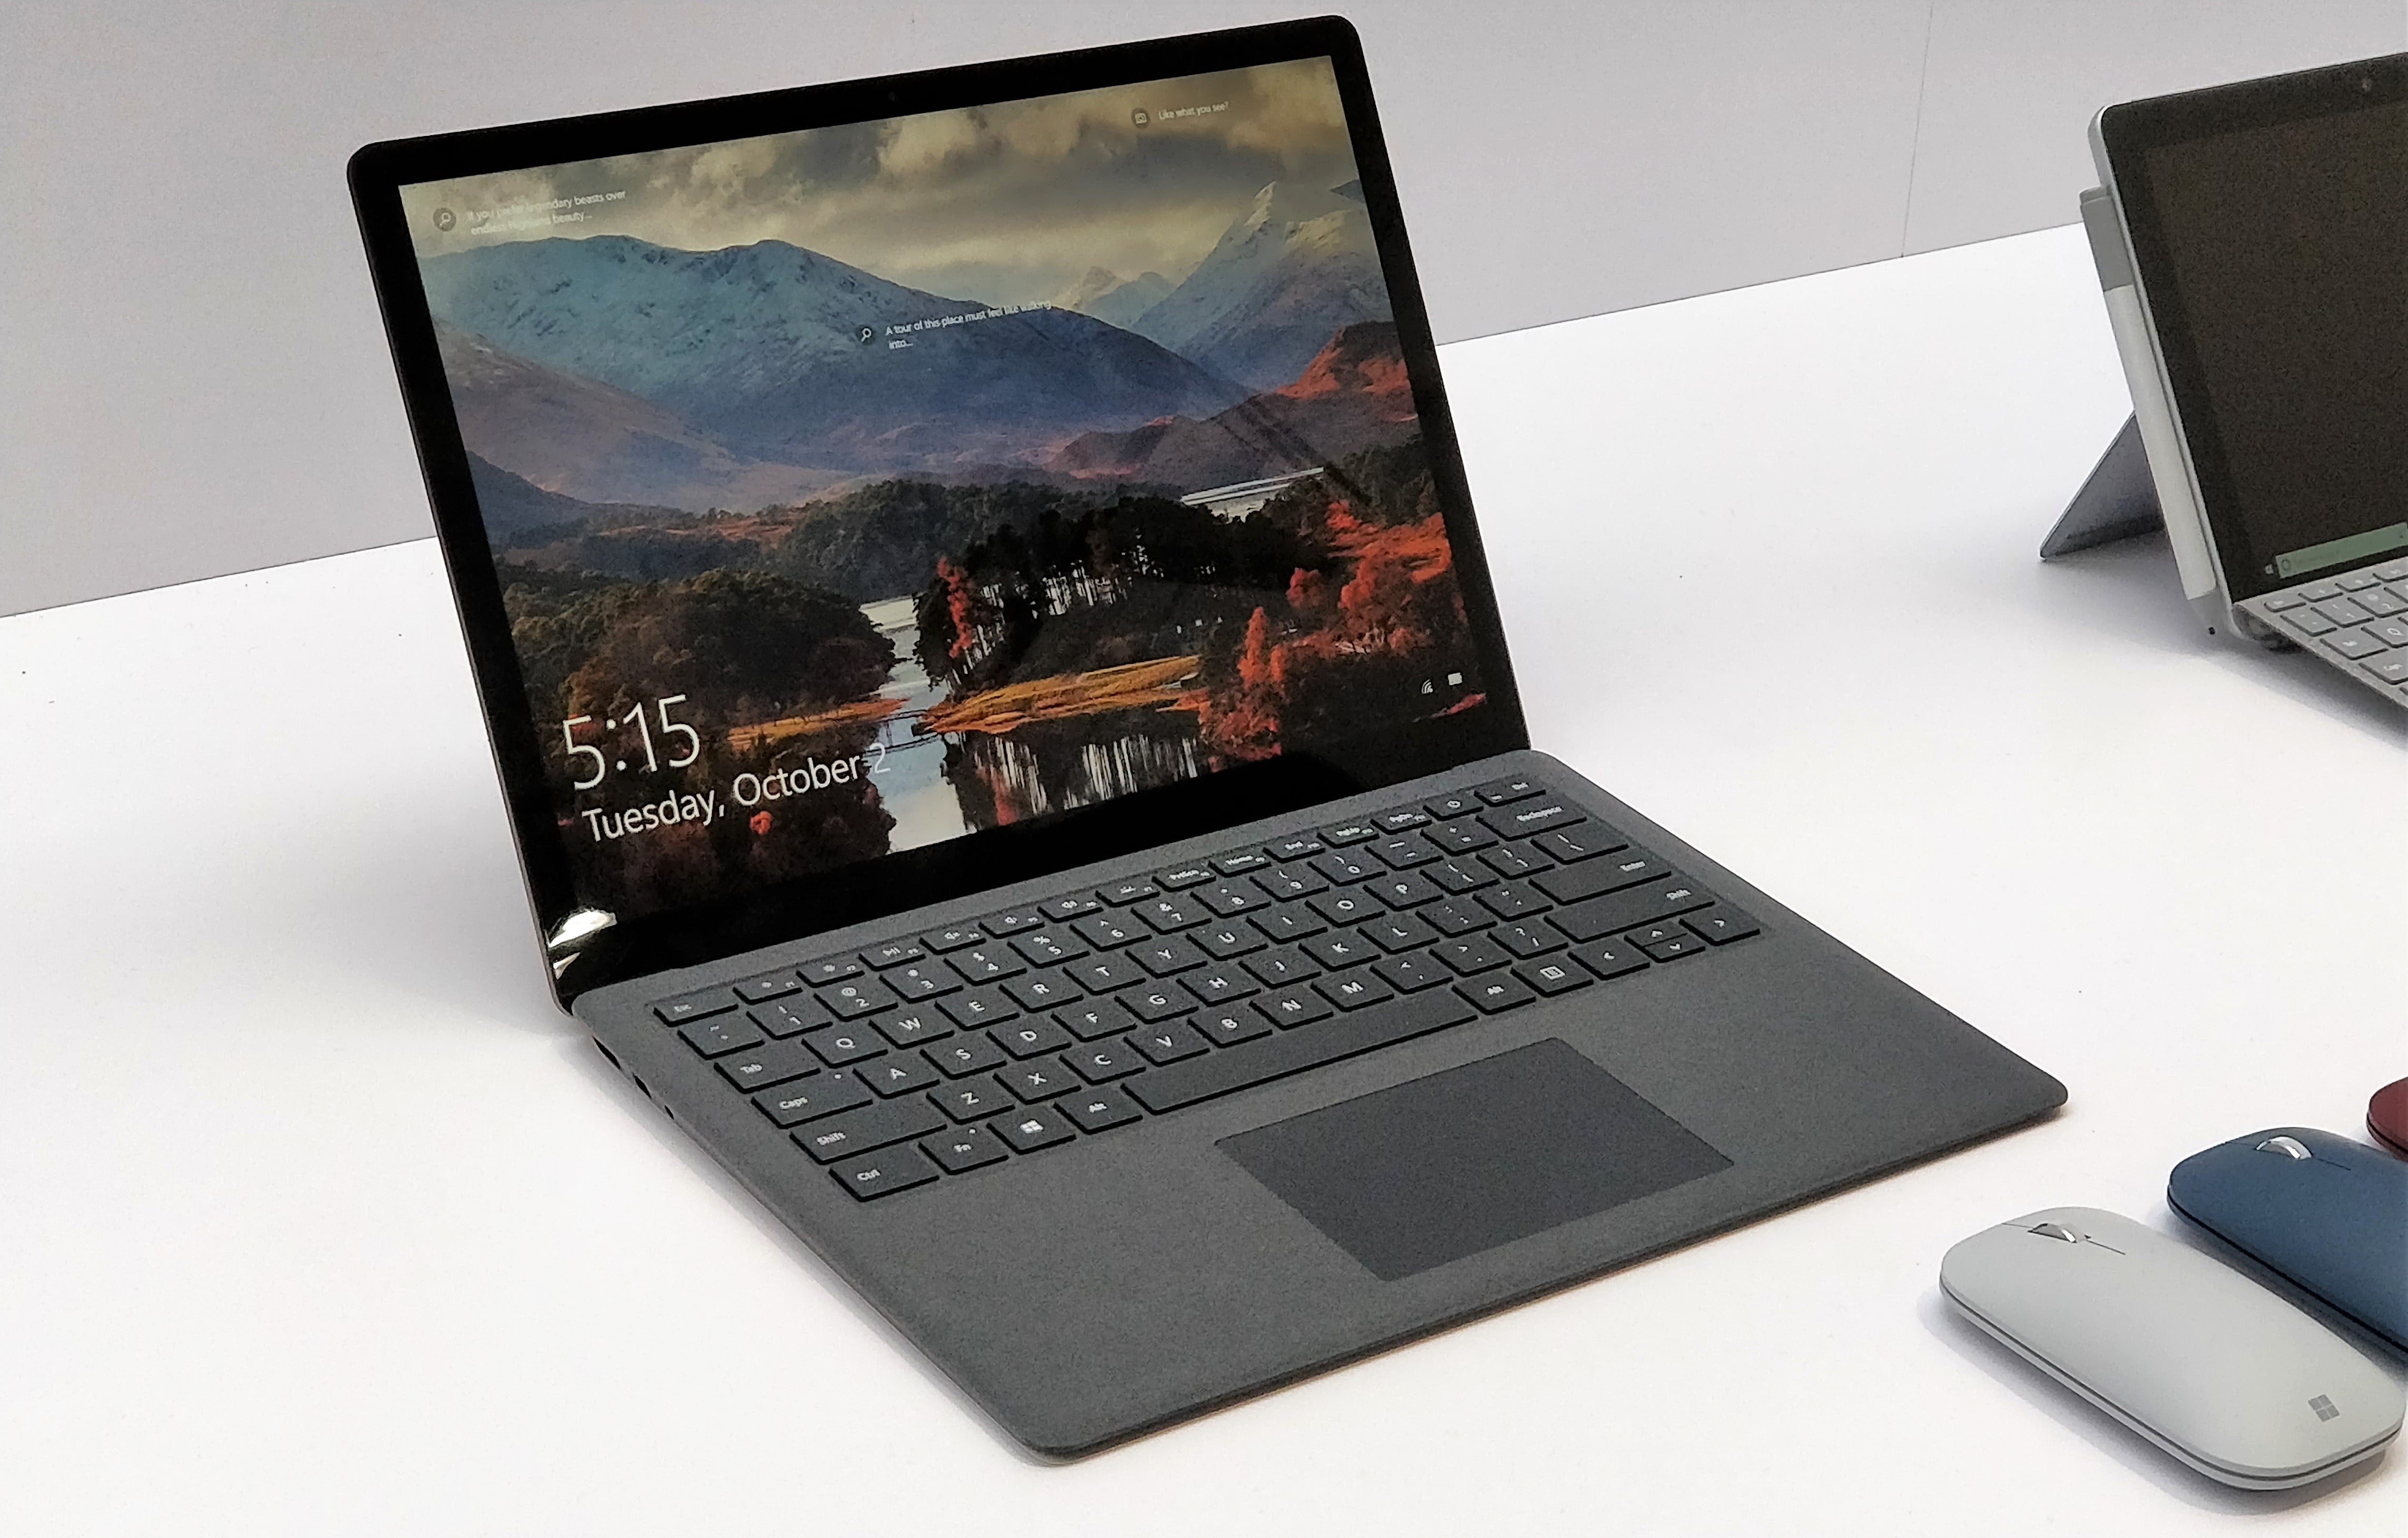 Microsoft's Surface sales soar to nearly $2 billion, though chip